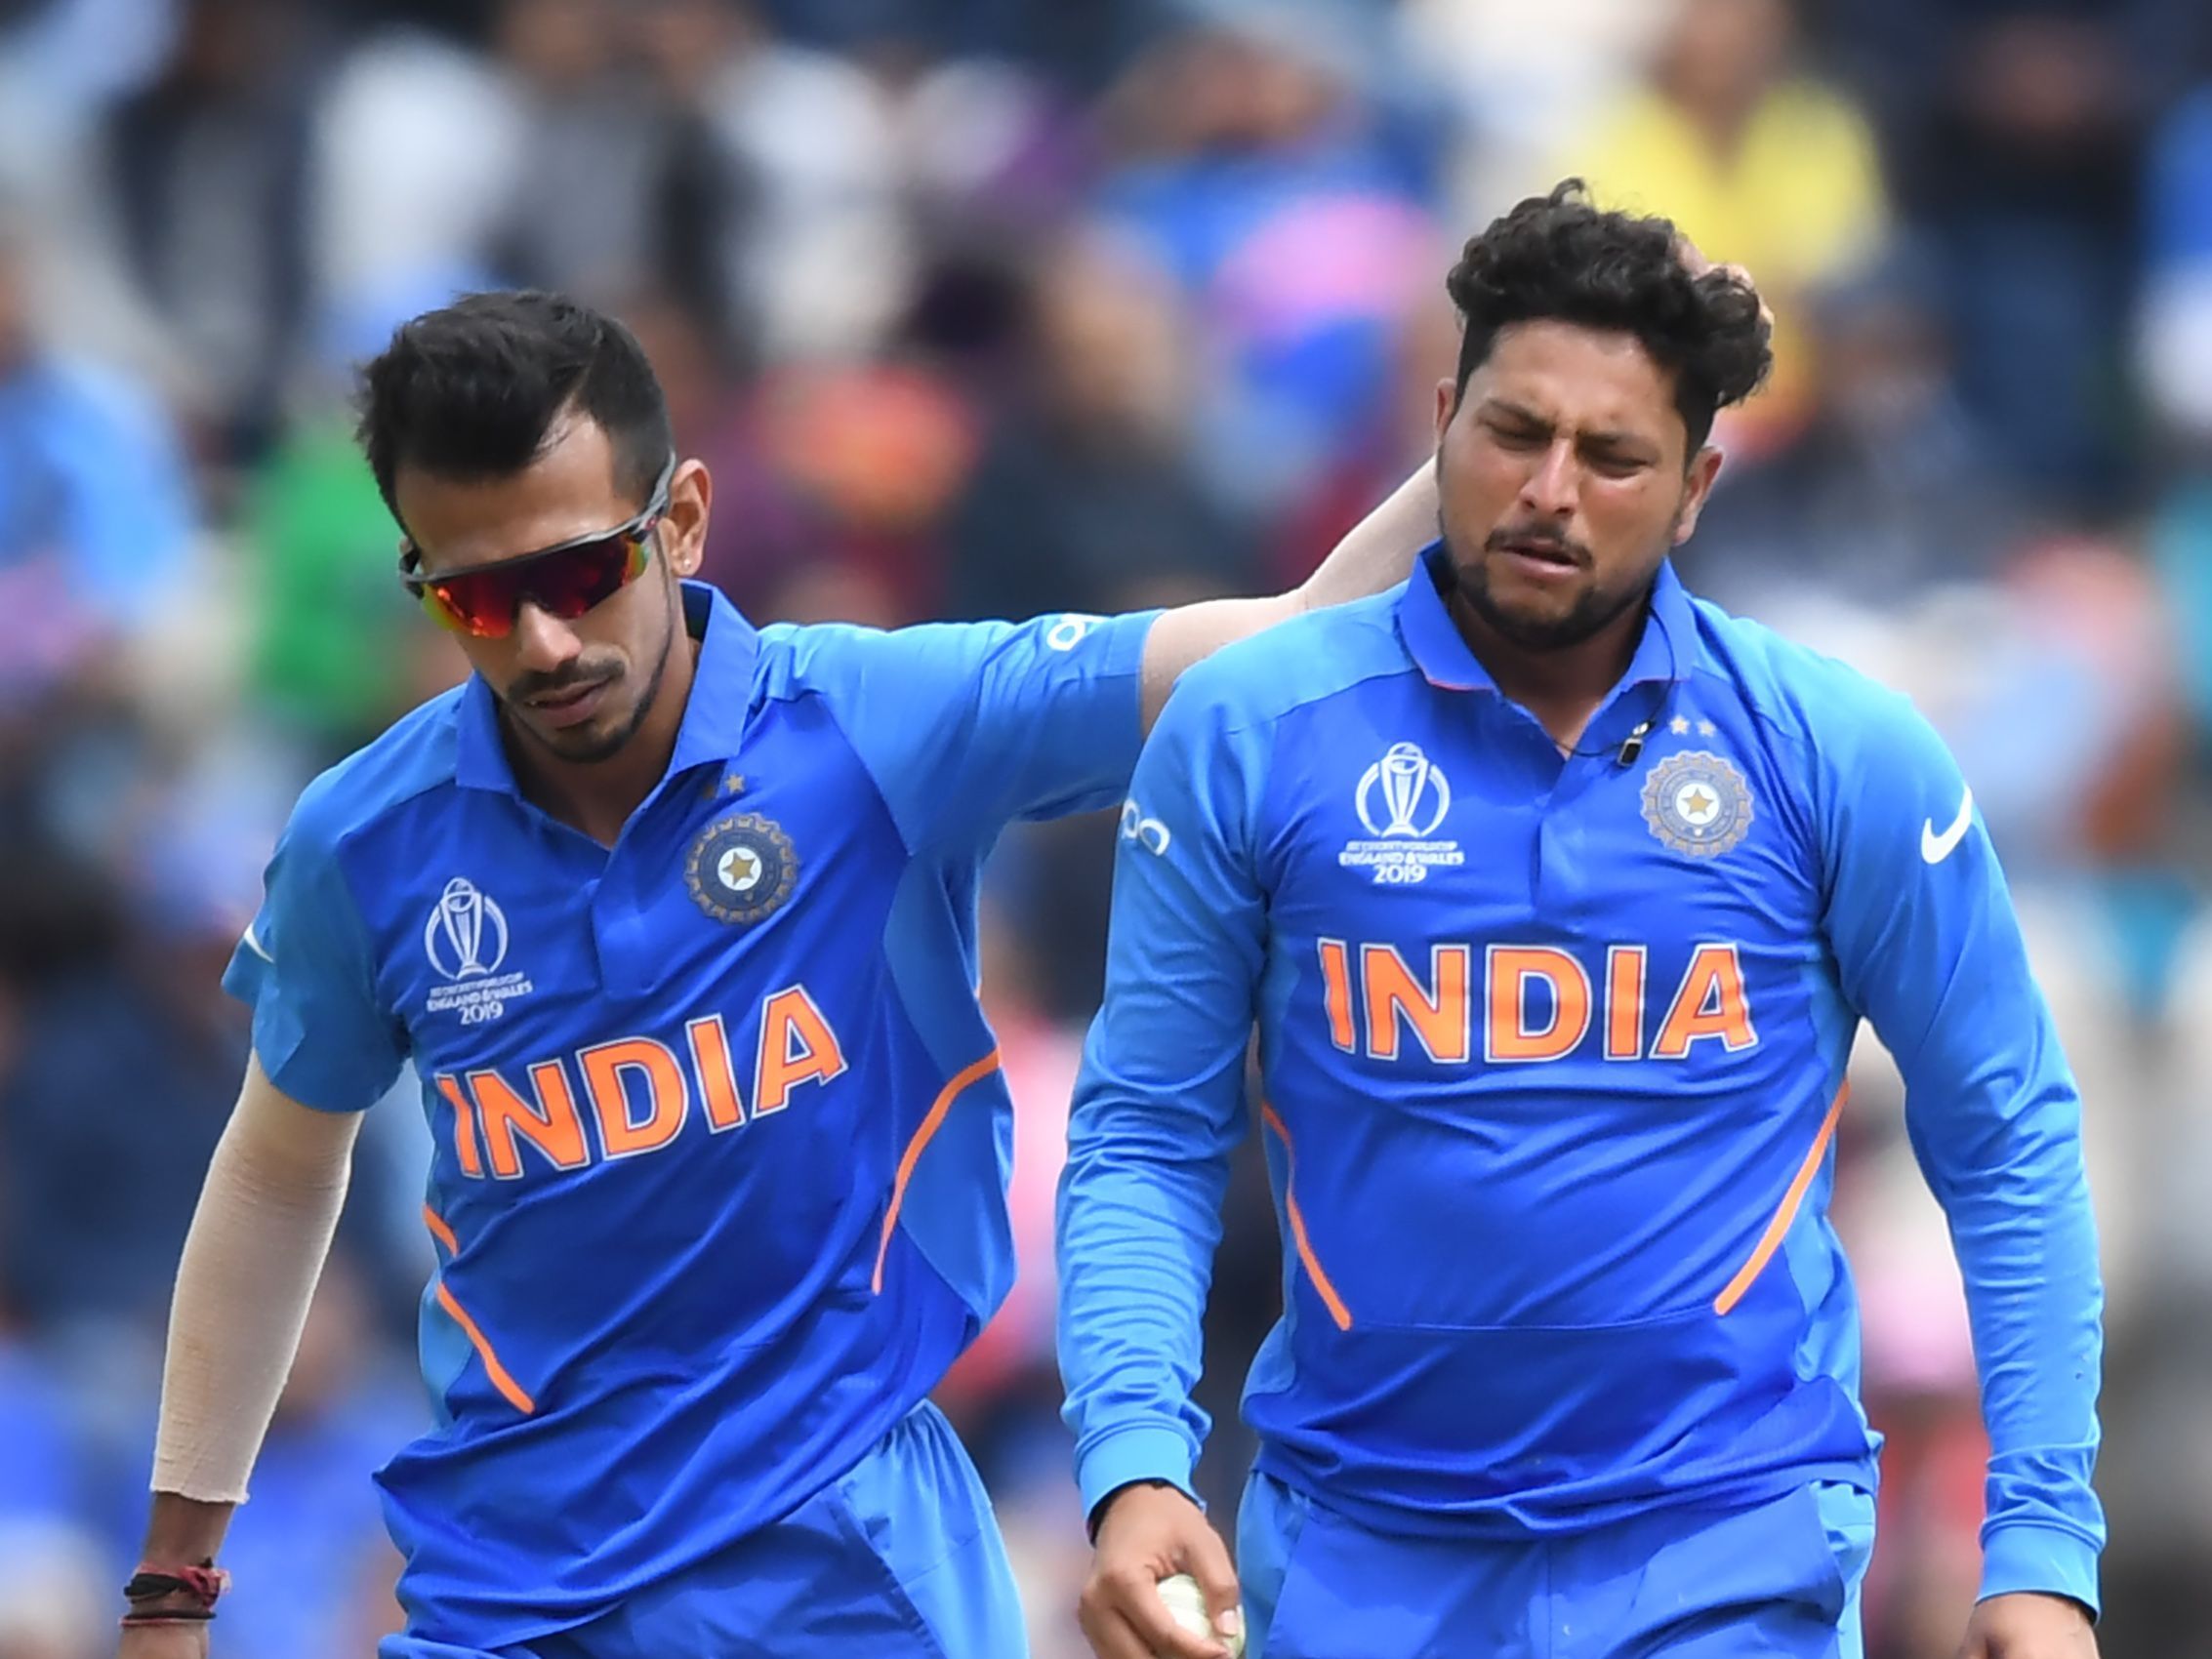 This Fan Tried To Take A Dig At Kuldeep Yadav And Yuzvendra Chahal Stopped Him Dead In His Tracks